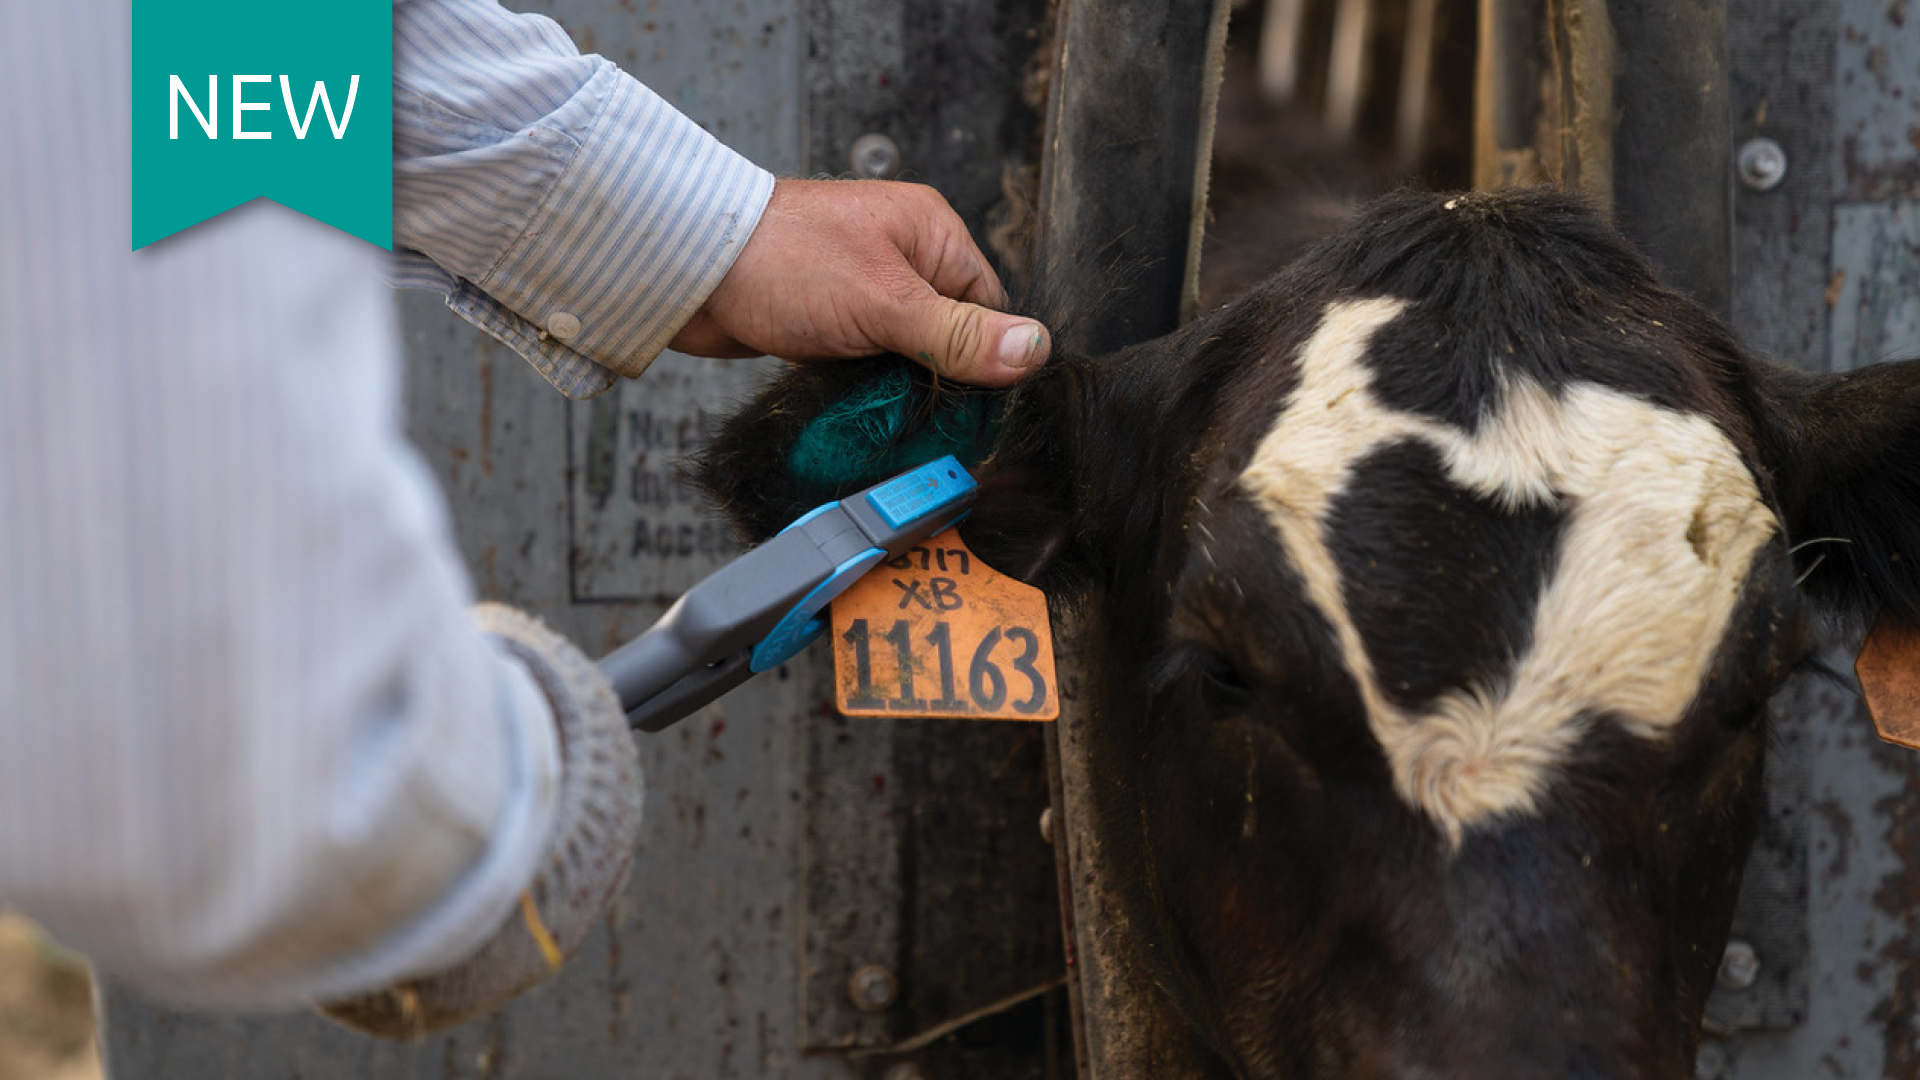 Cattle Ear Tagging Best Practices in 2023